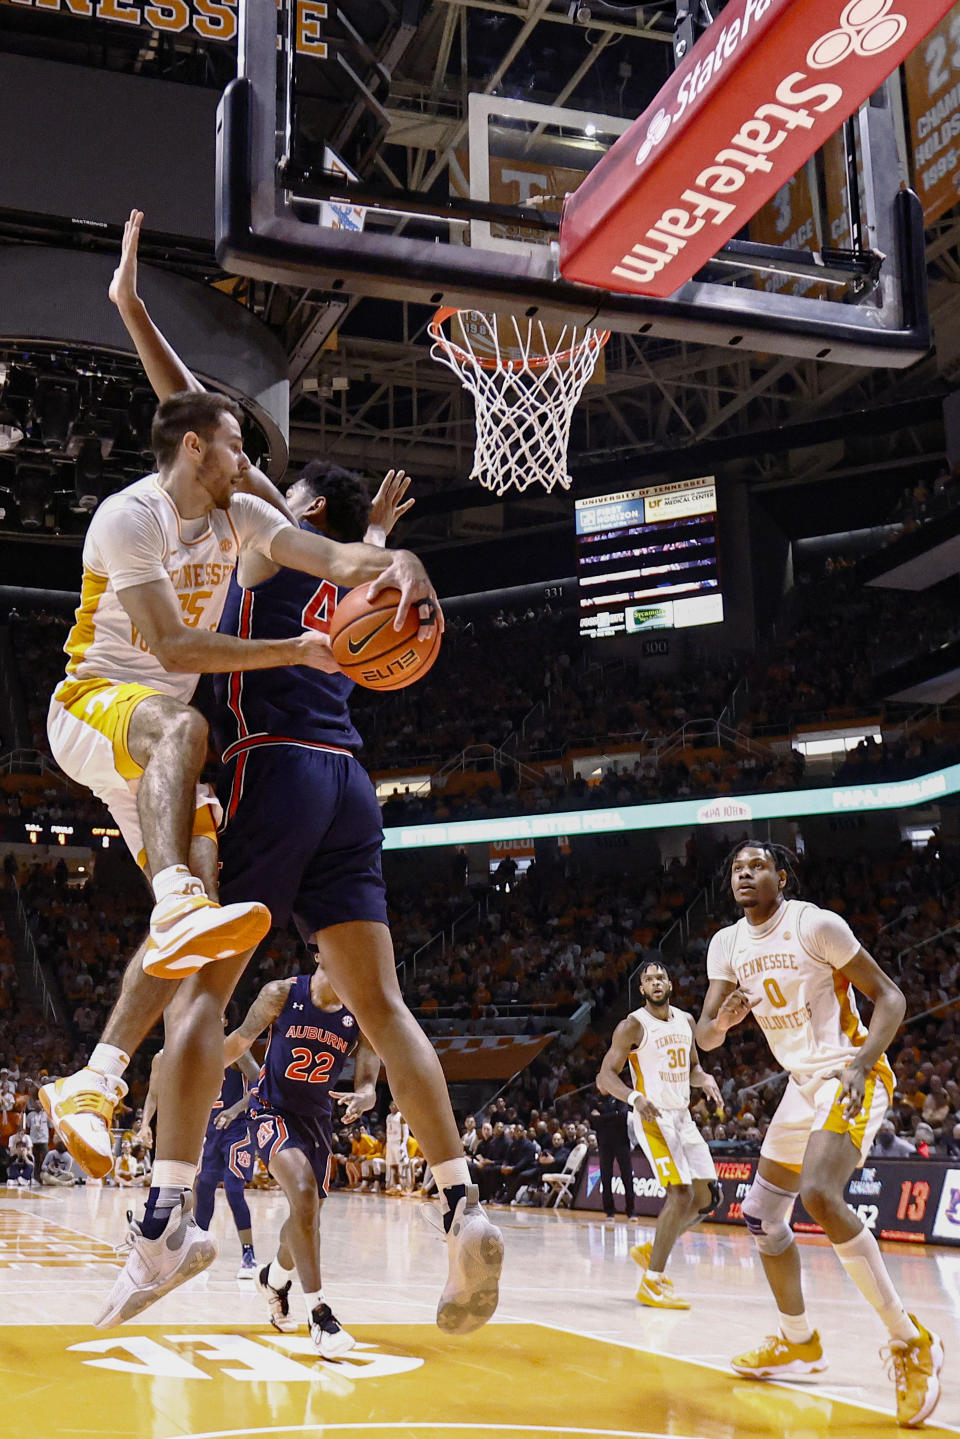 Tennessee guard Santiago Vescovi (25) passes the ball around Auburn center Dylan Cardwell (44) during the first half of an NCAA college basketball game Saturday, Feb. 26, 2022, in Knoxville, Tenn. (AP Photo/Wade Payne)